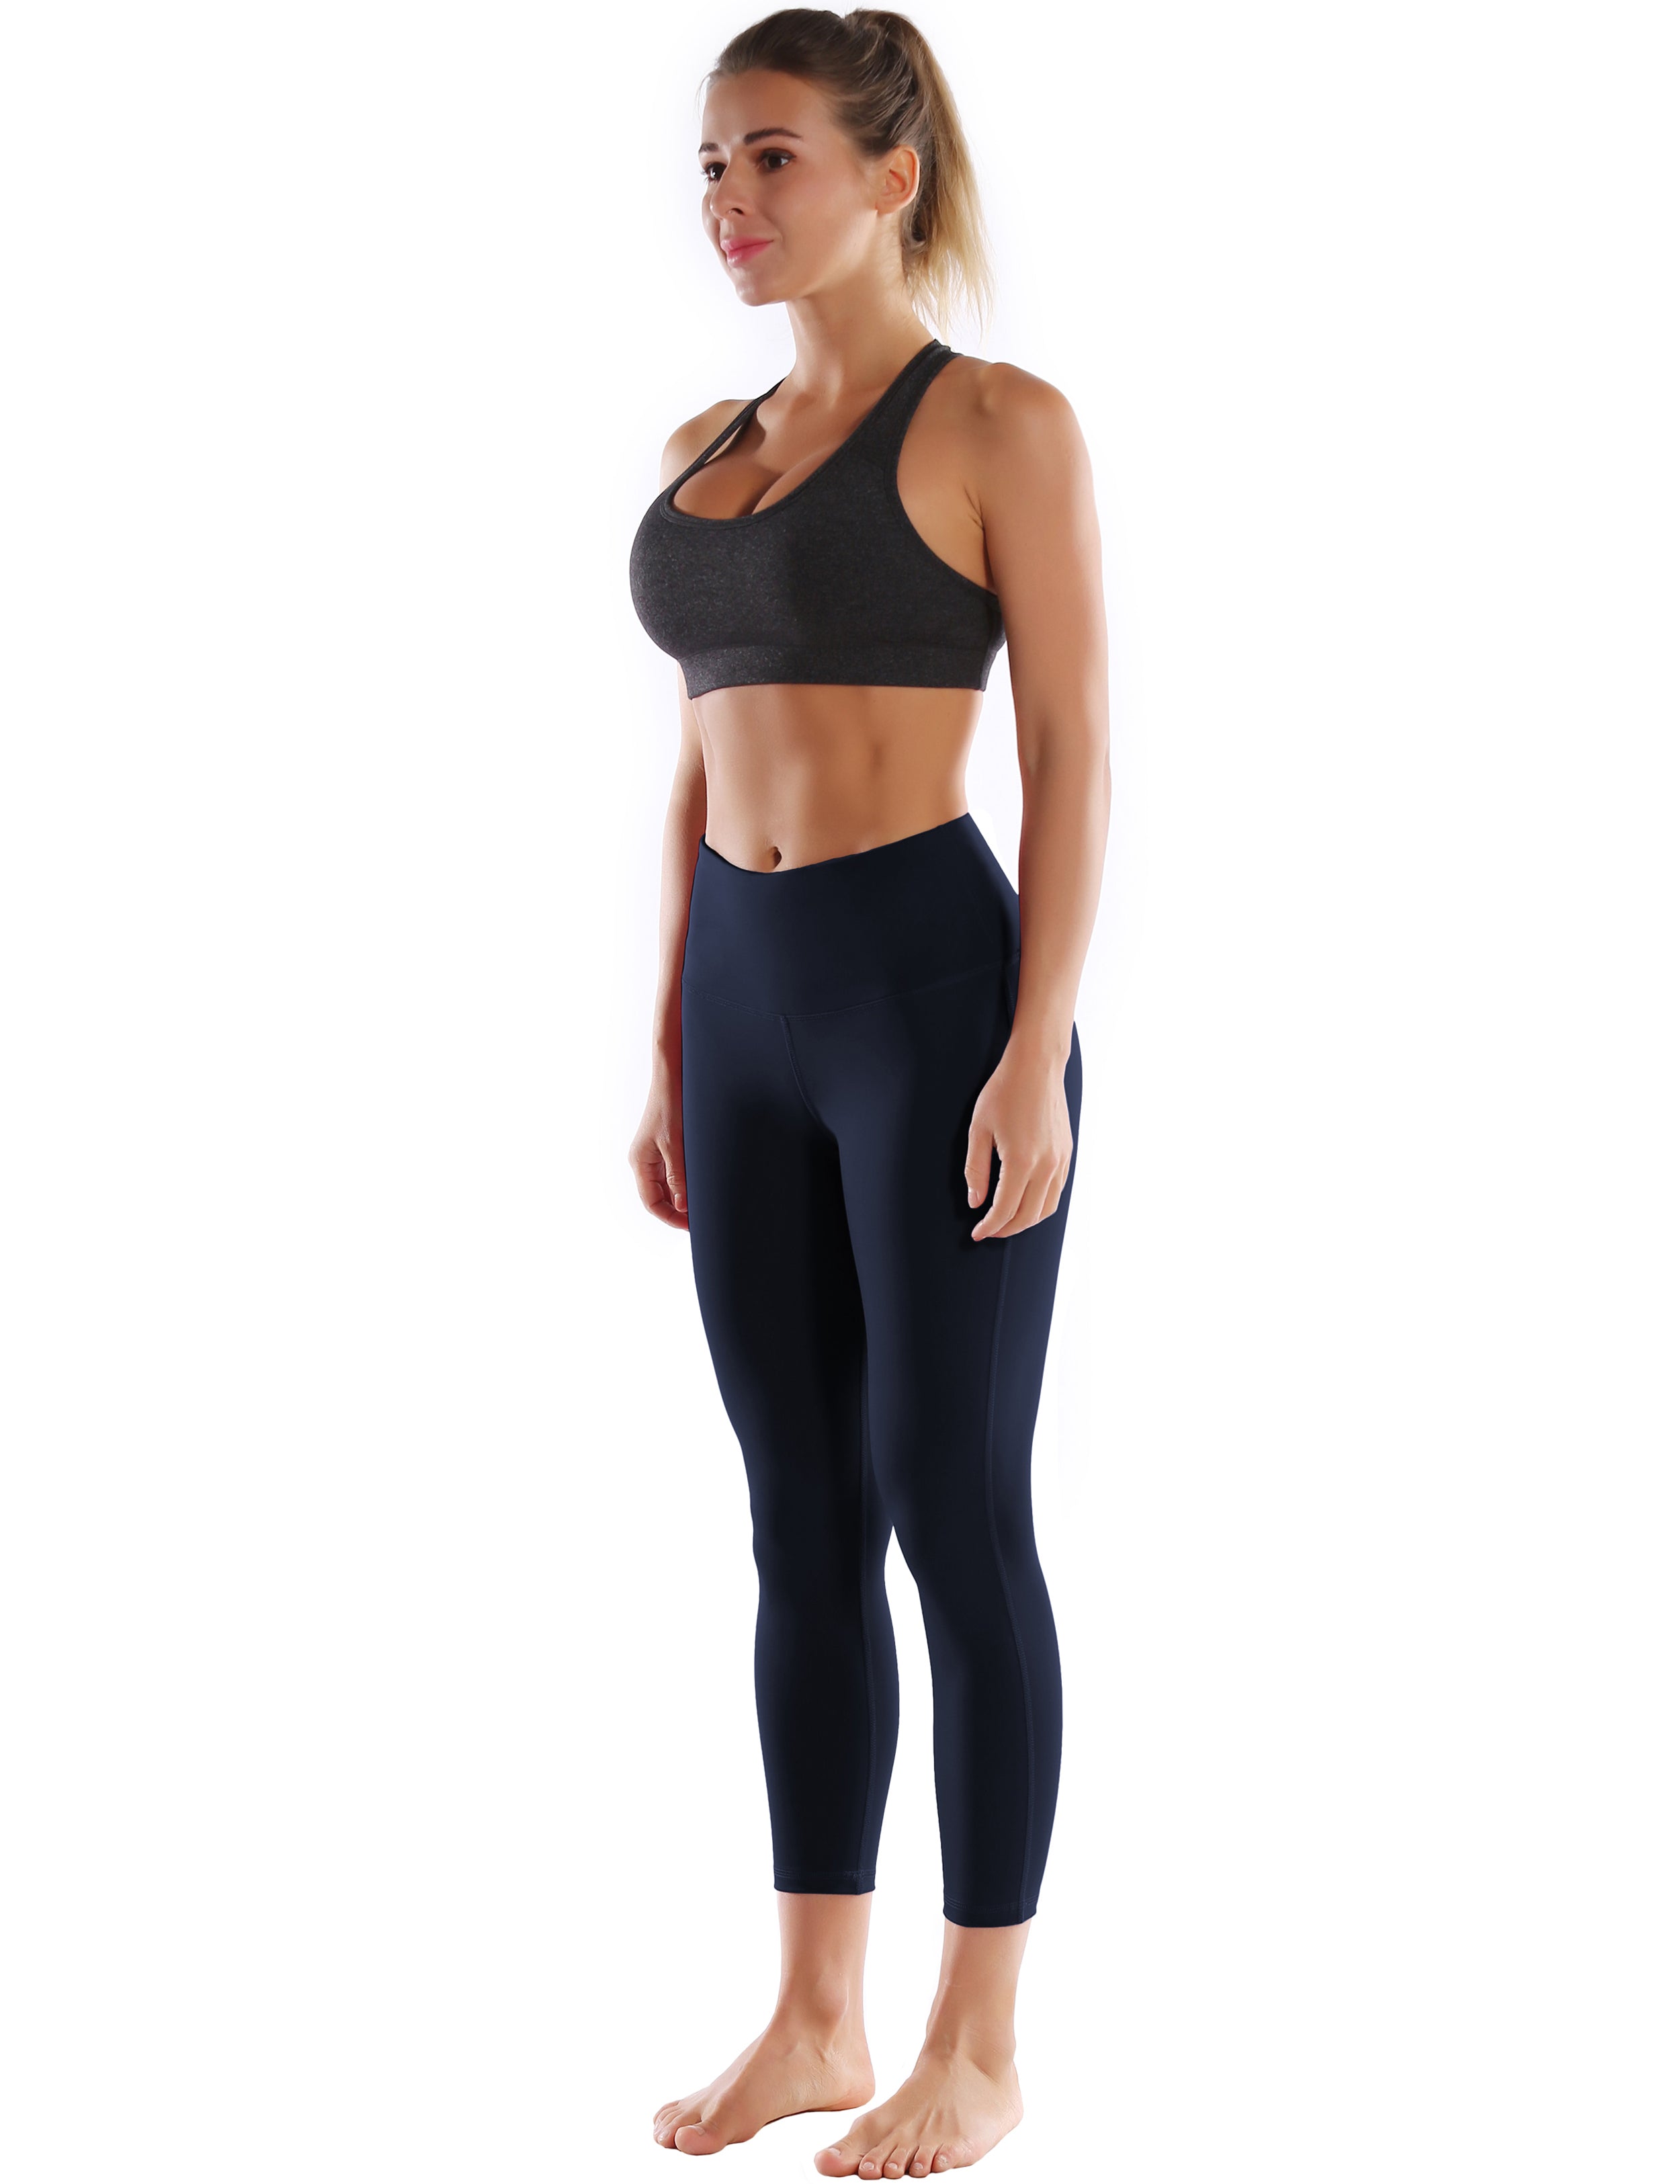 22" High Waist Side Line Capris darknavy 75%Nylon/25%Spandex Fabric doesn't attract lint easily 4-way stretch No see-through Moisture-wicking Tummy control Inner pocket